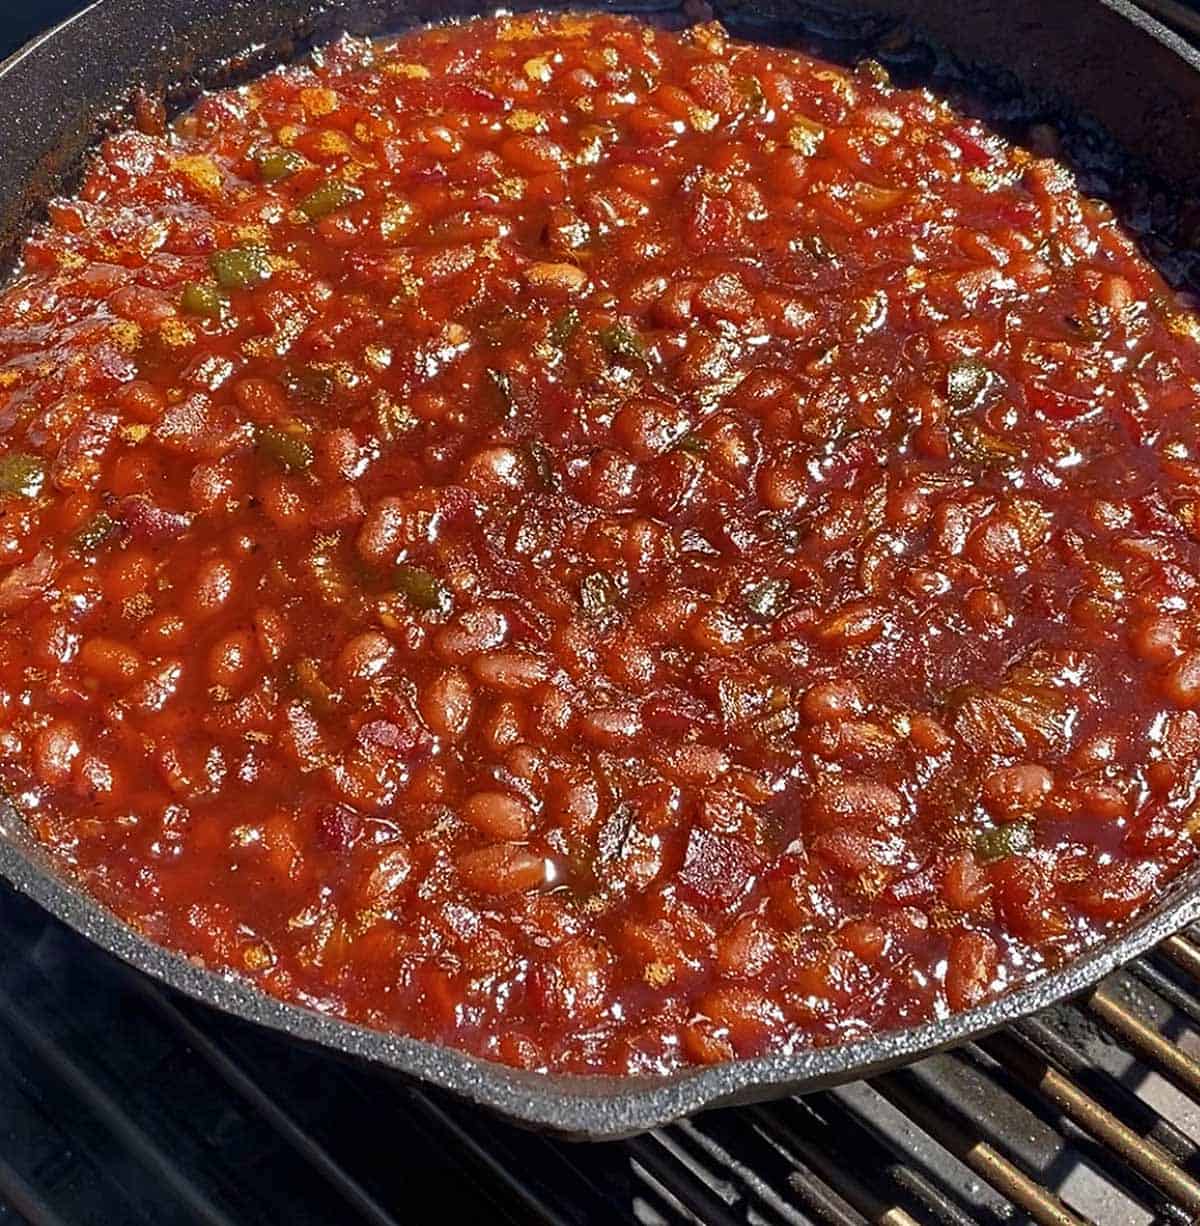 Cooked baked beans in a skillet ready to be removed from the smoker.